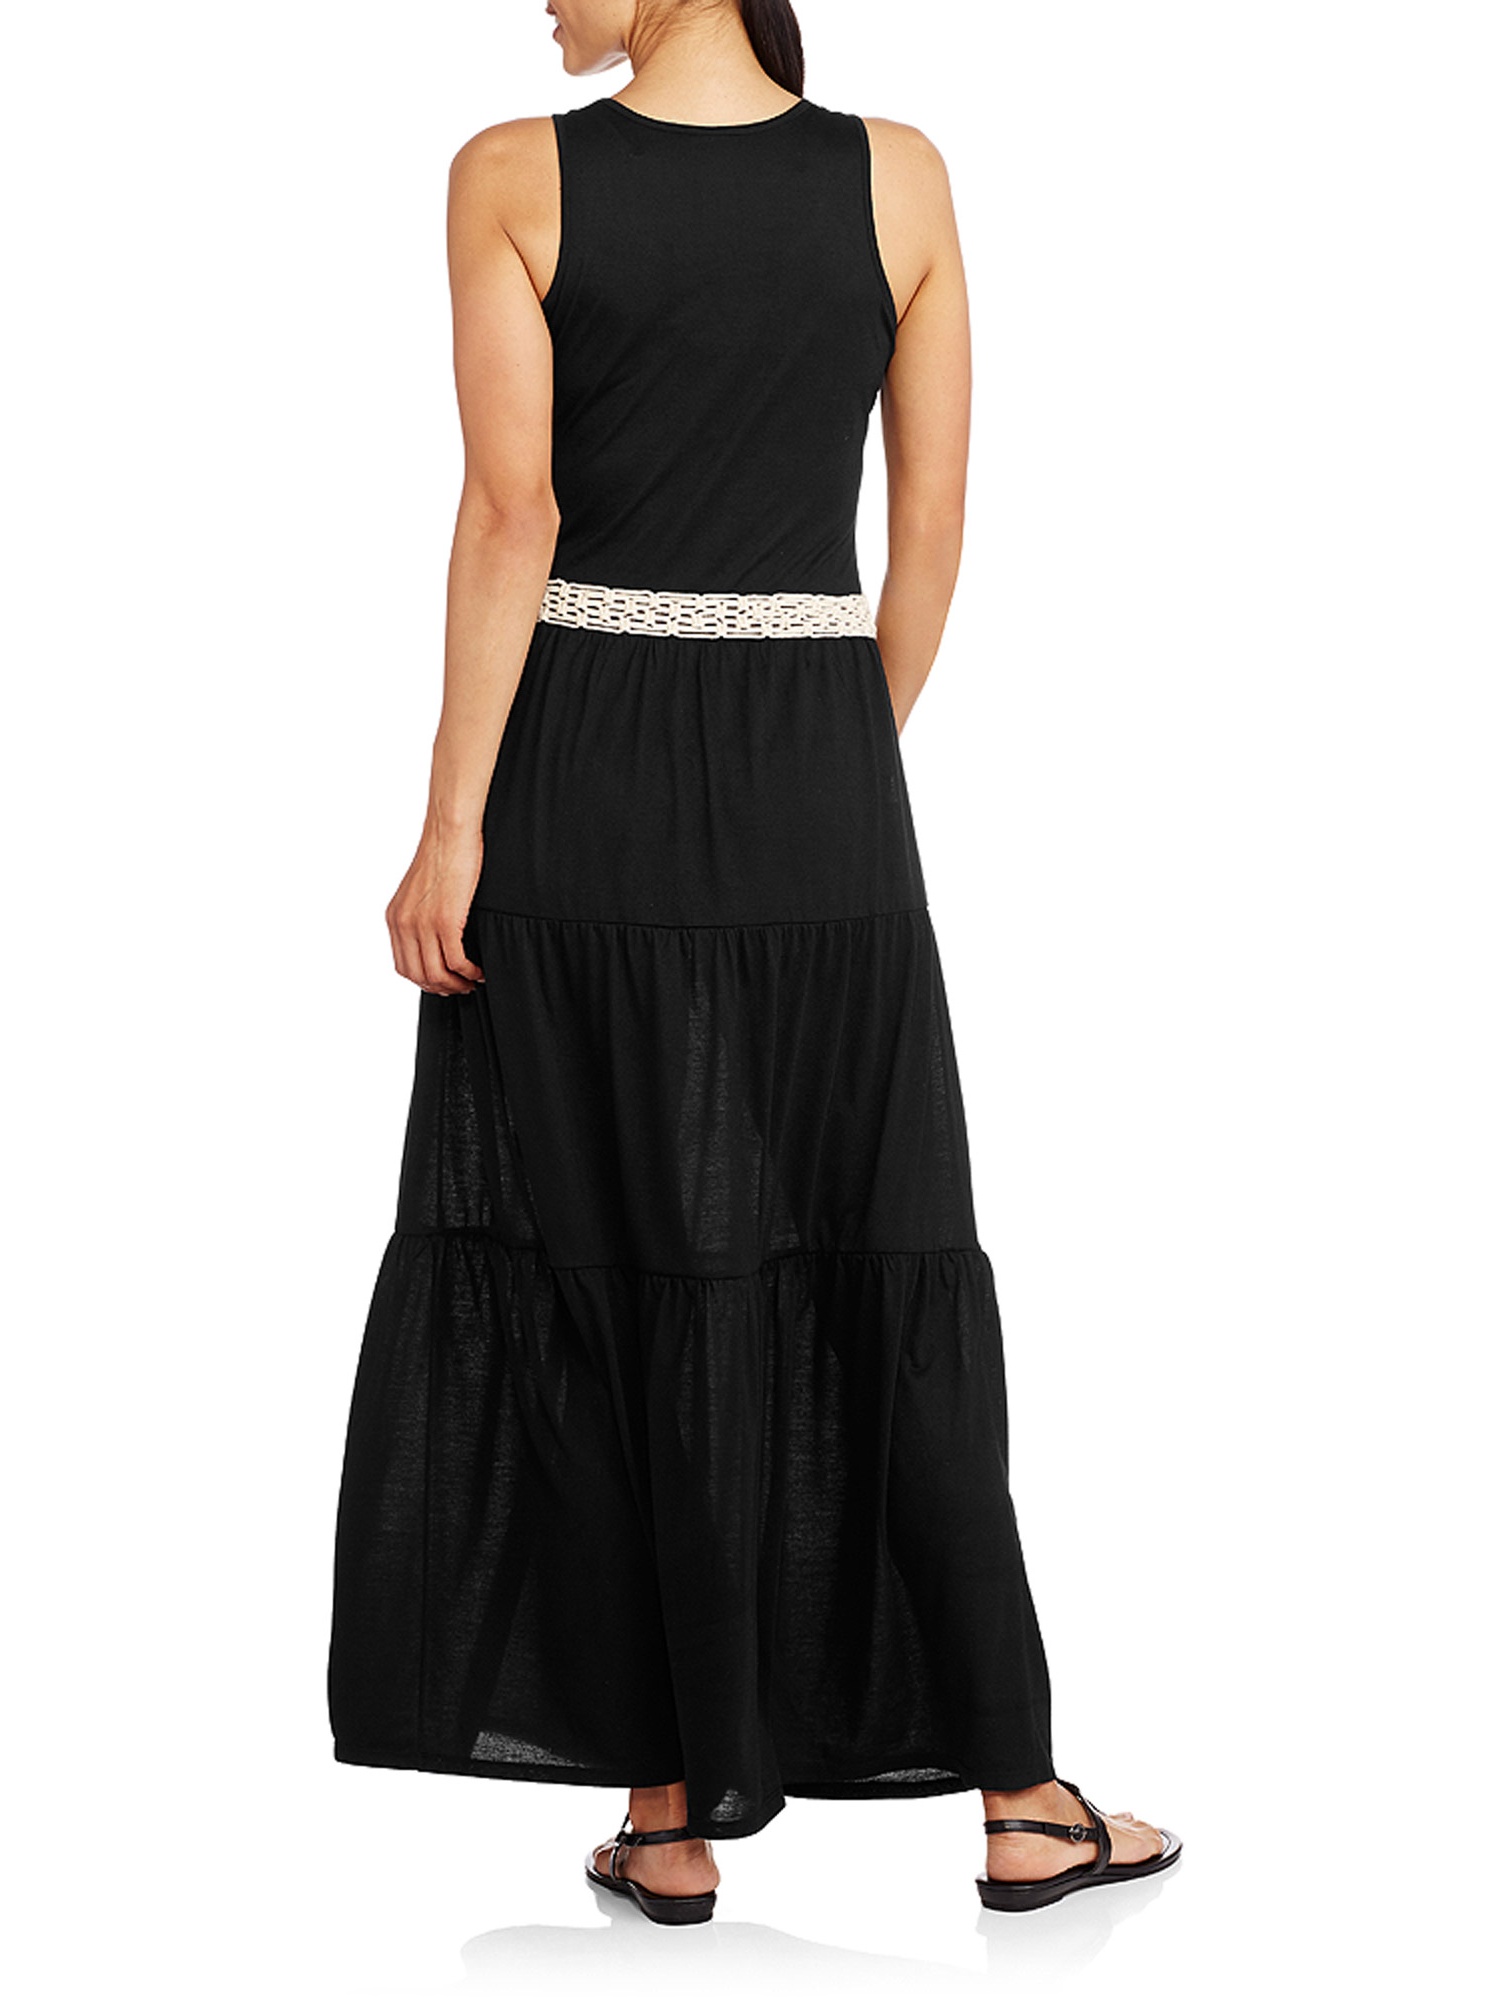 Women's Belted Maxi Dress - image 2 of 2